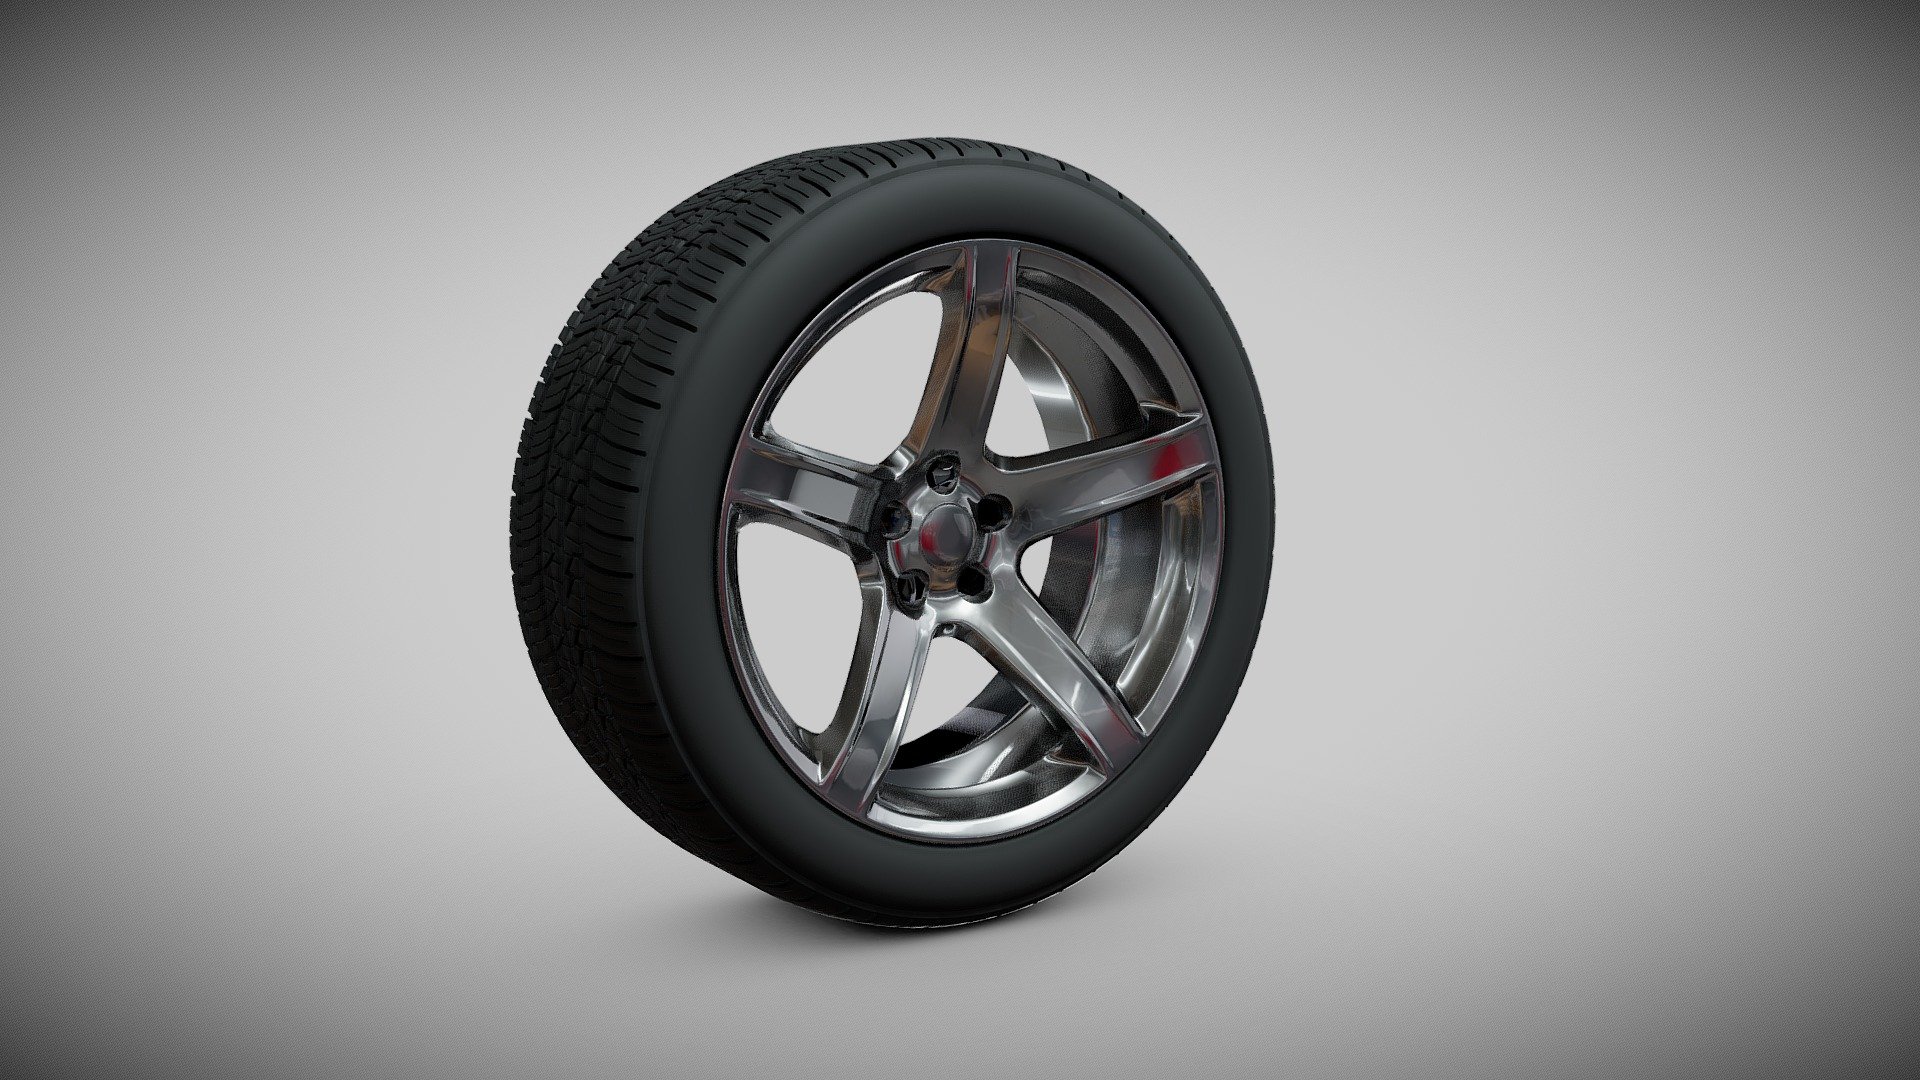 Dodge Challenger model with modeled tire threads.

Ready for printing although I'm not sure it's on scale 3d model